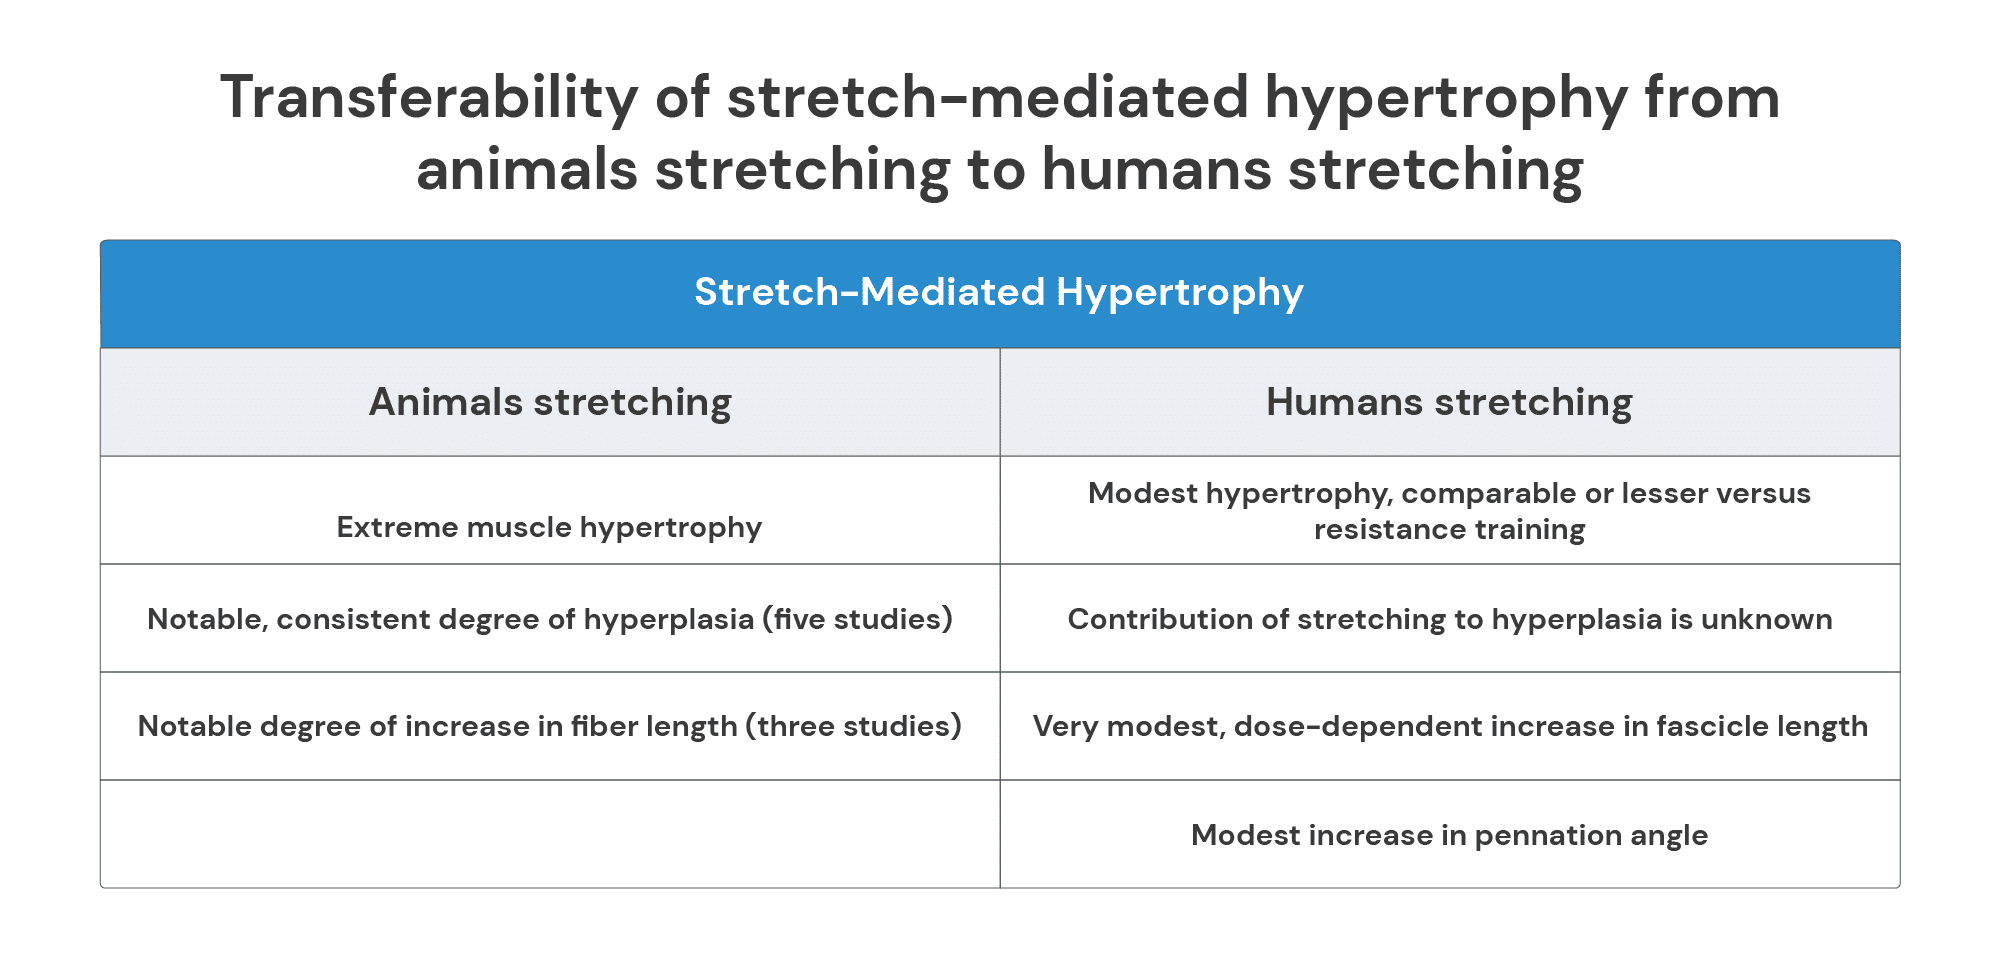 Transferability of stretch-mediated hypertrophy from animals stretching to humans stretching